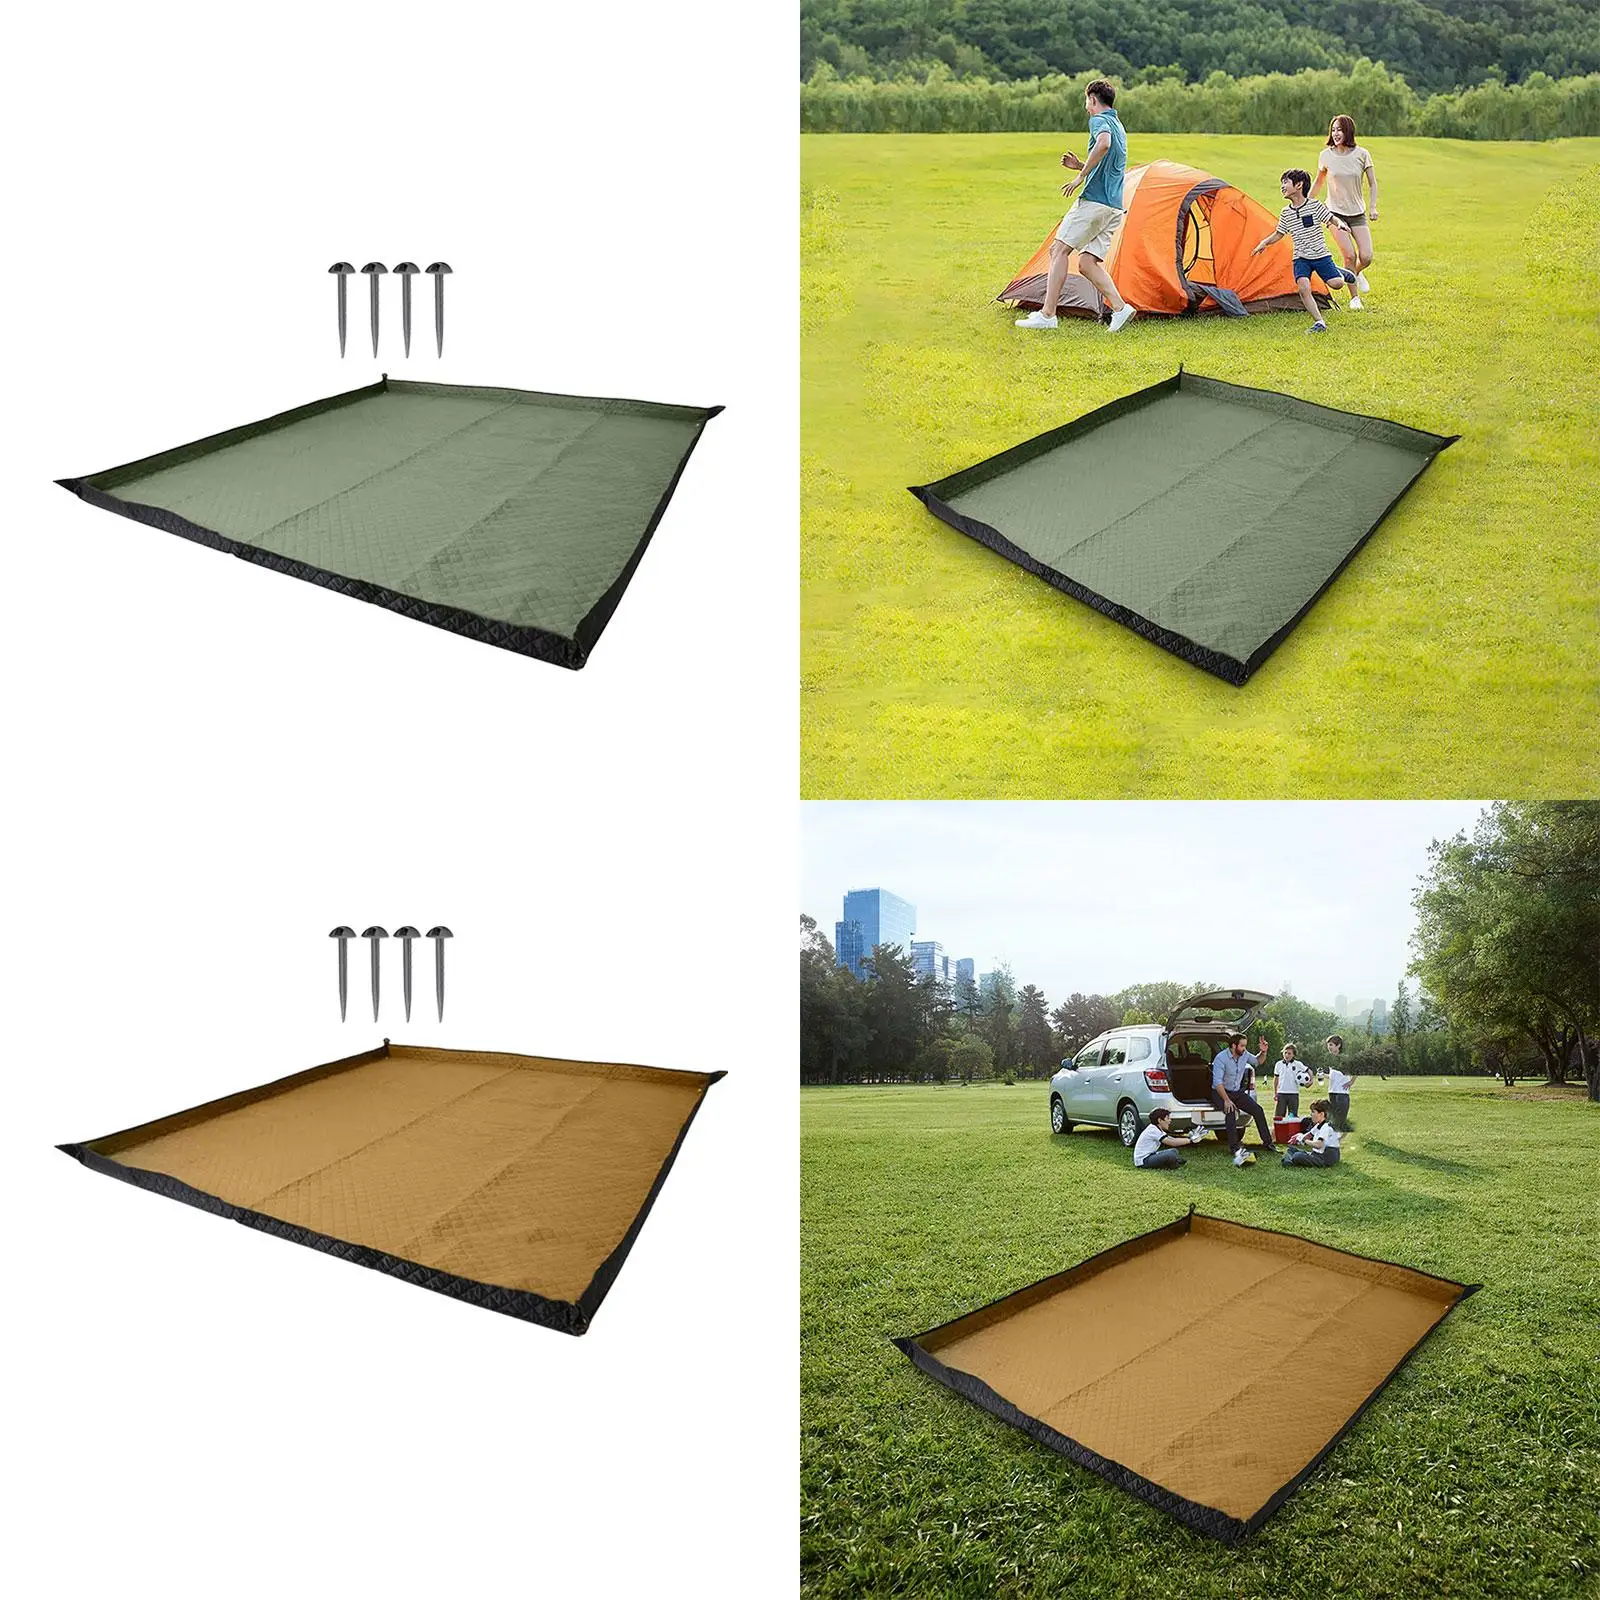 Sleeping Pad Foldable Park Blanket 200cmx200cm Portable Rug Mattress Tent Pad for Camping Concerts Party Backpacking Family